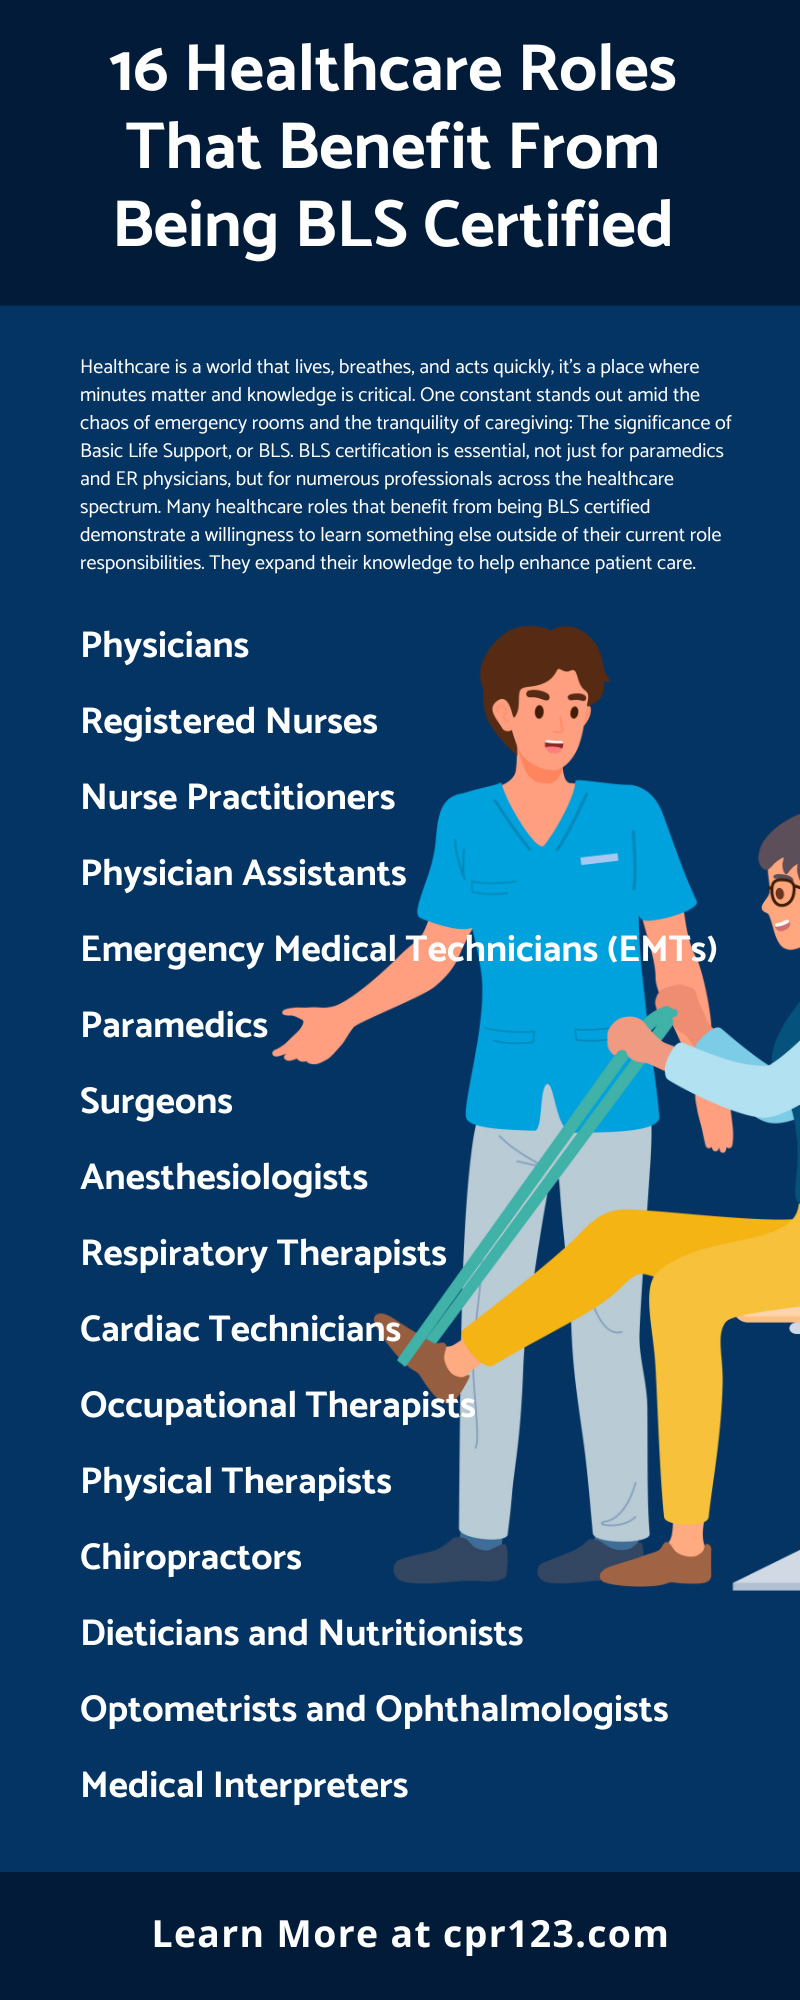 16 Healthcare Roles That Benefit From Being BLS Certified
